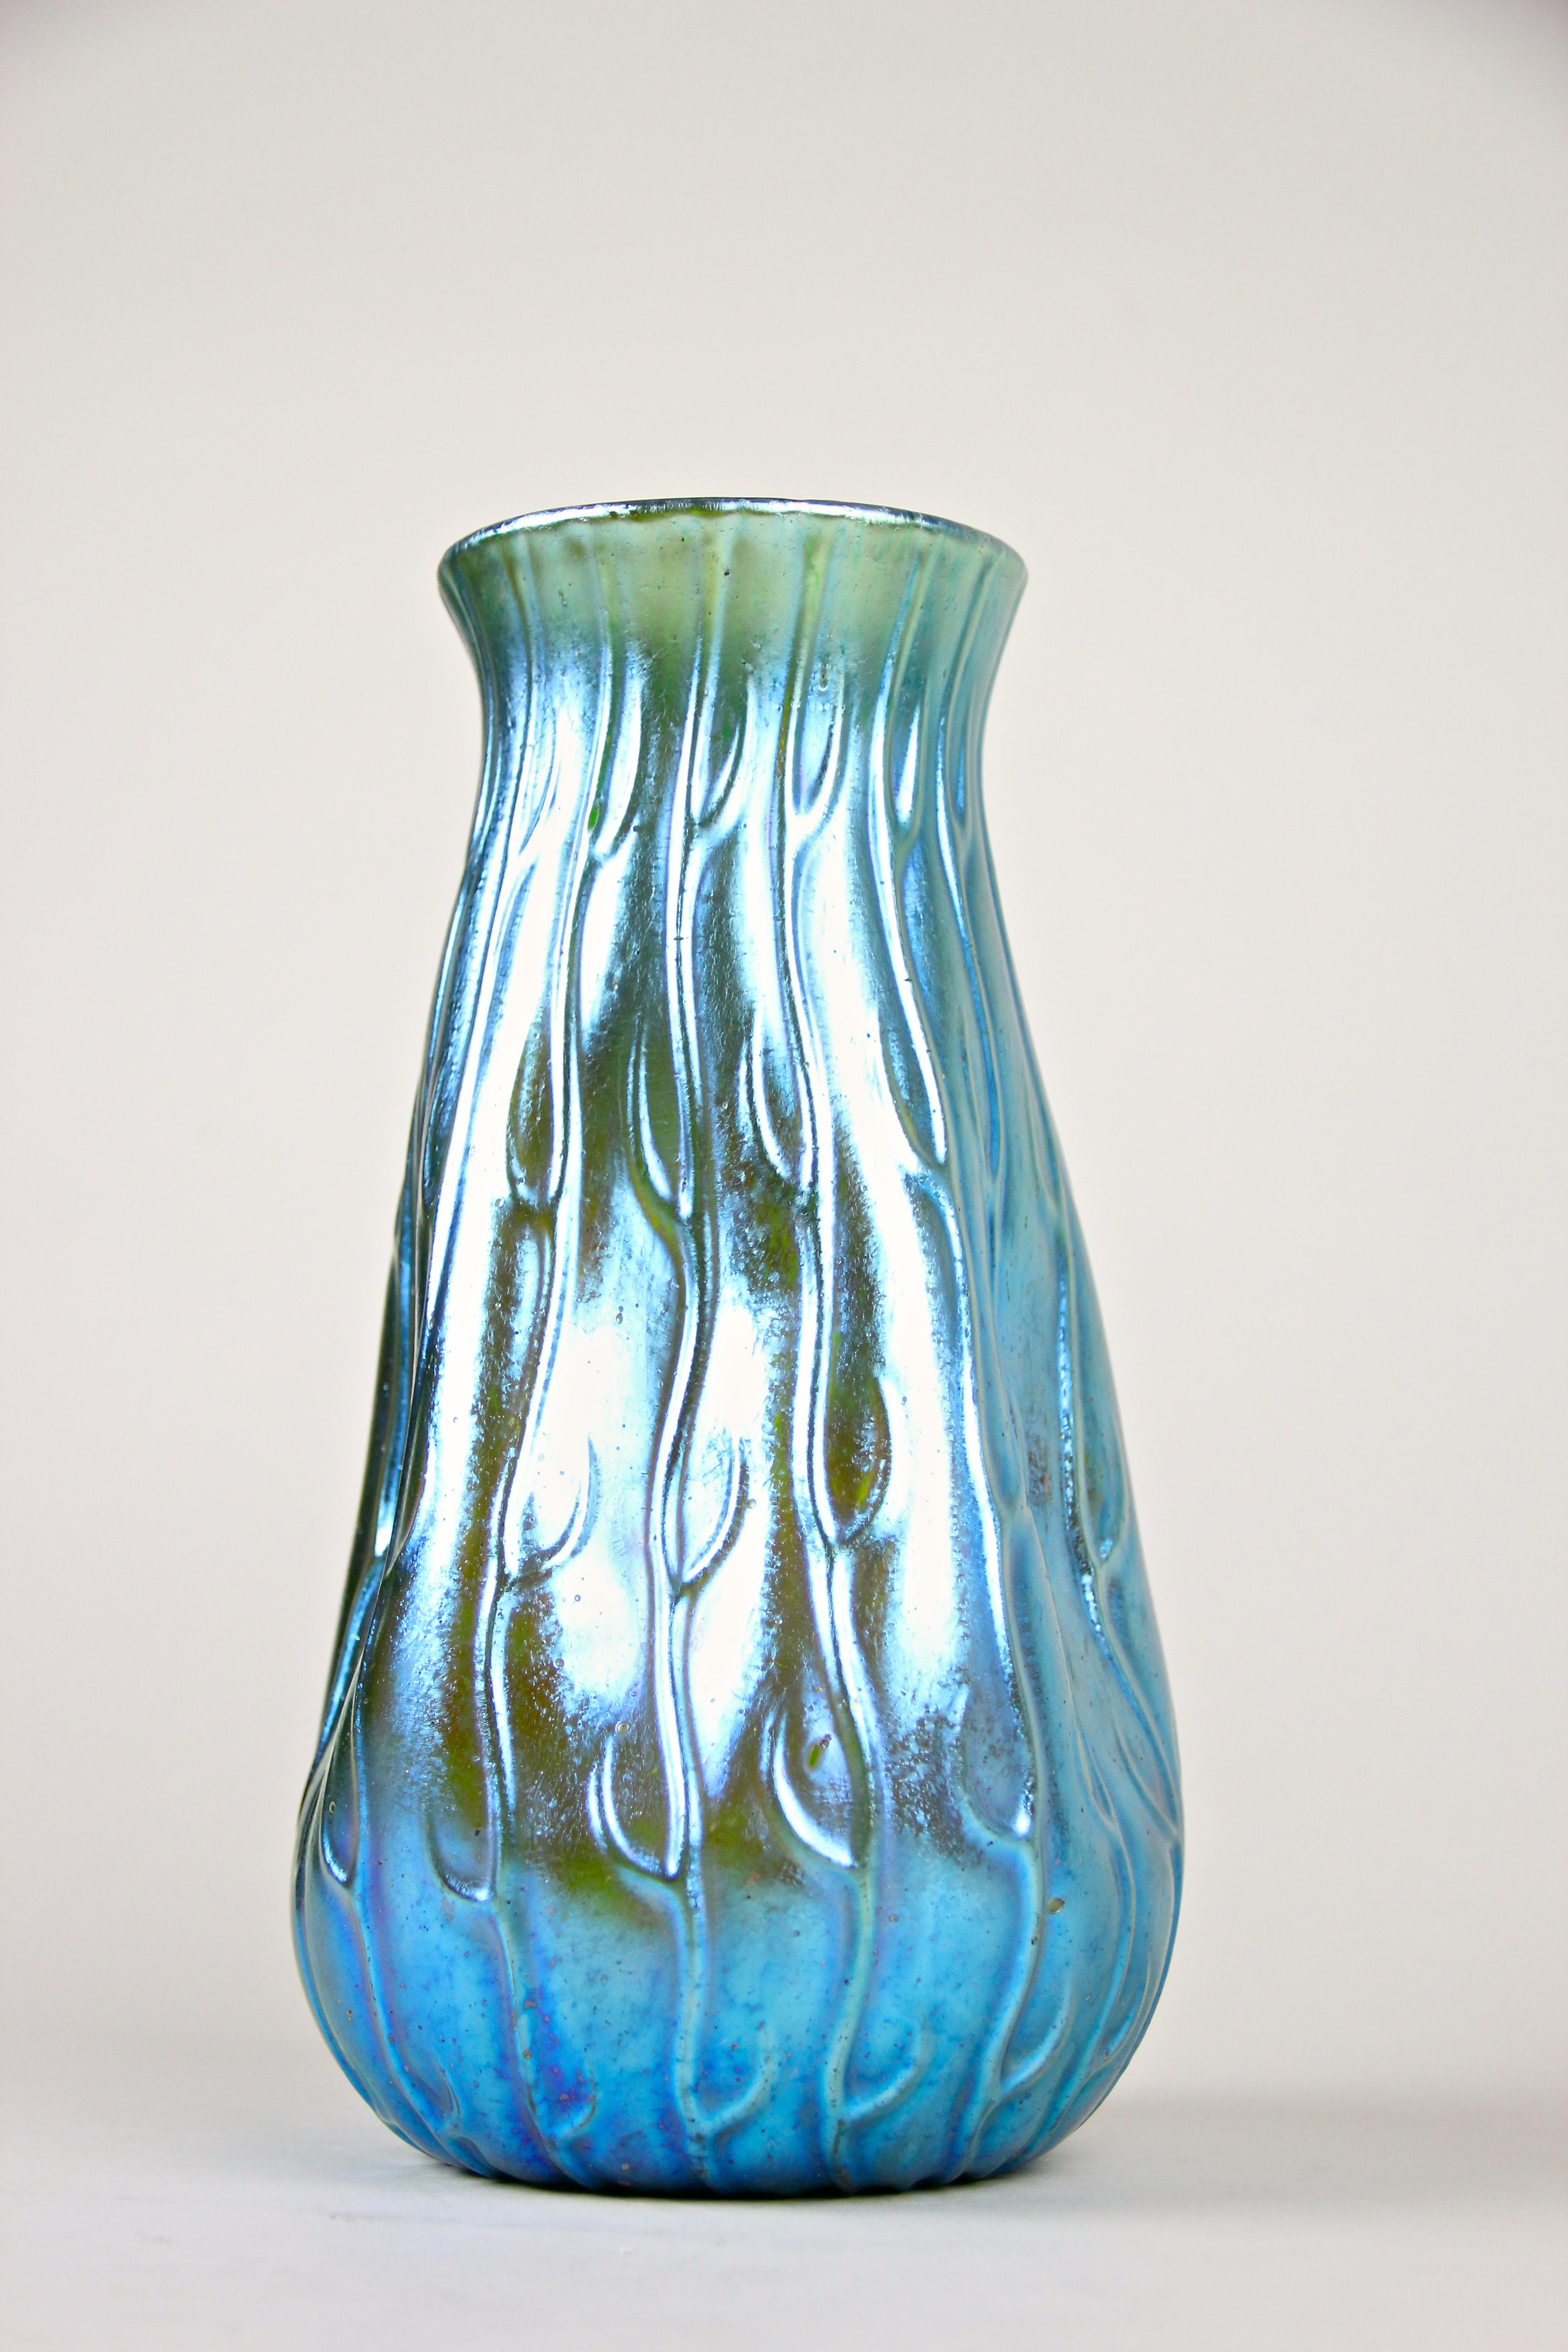 Gorgeous Loetz Witwe Glass Vase showing the famous Neptun decoration, a fantastic design with characteristic vertical branched 'seaweed' pattern finished with Silberiris. The irdiscent surface of this very decorative Loetz vase shimmers in lovely